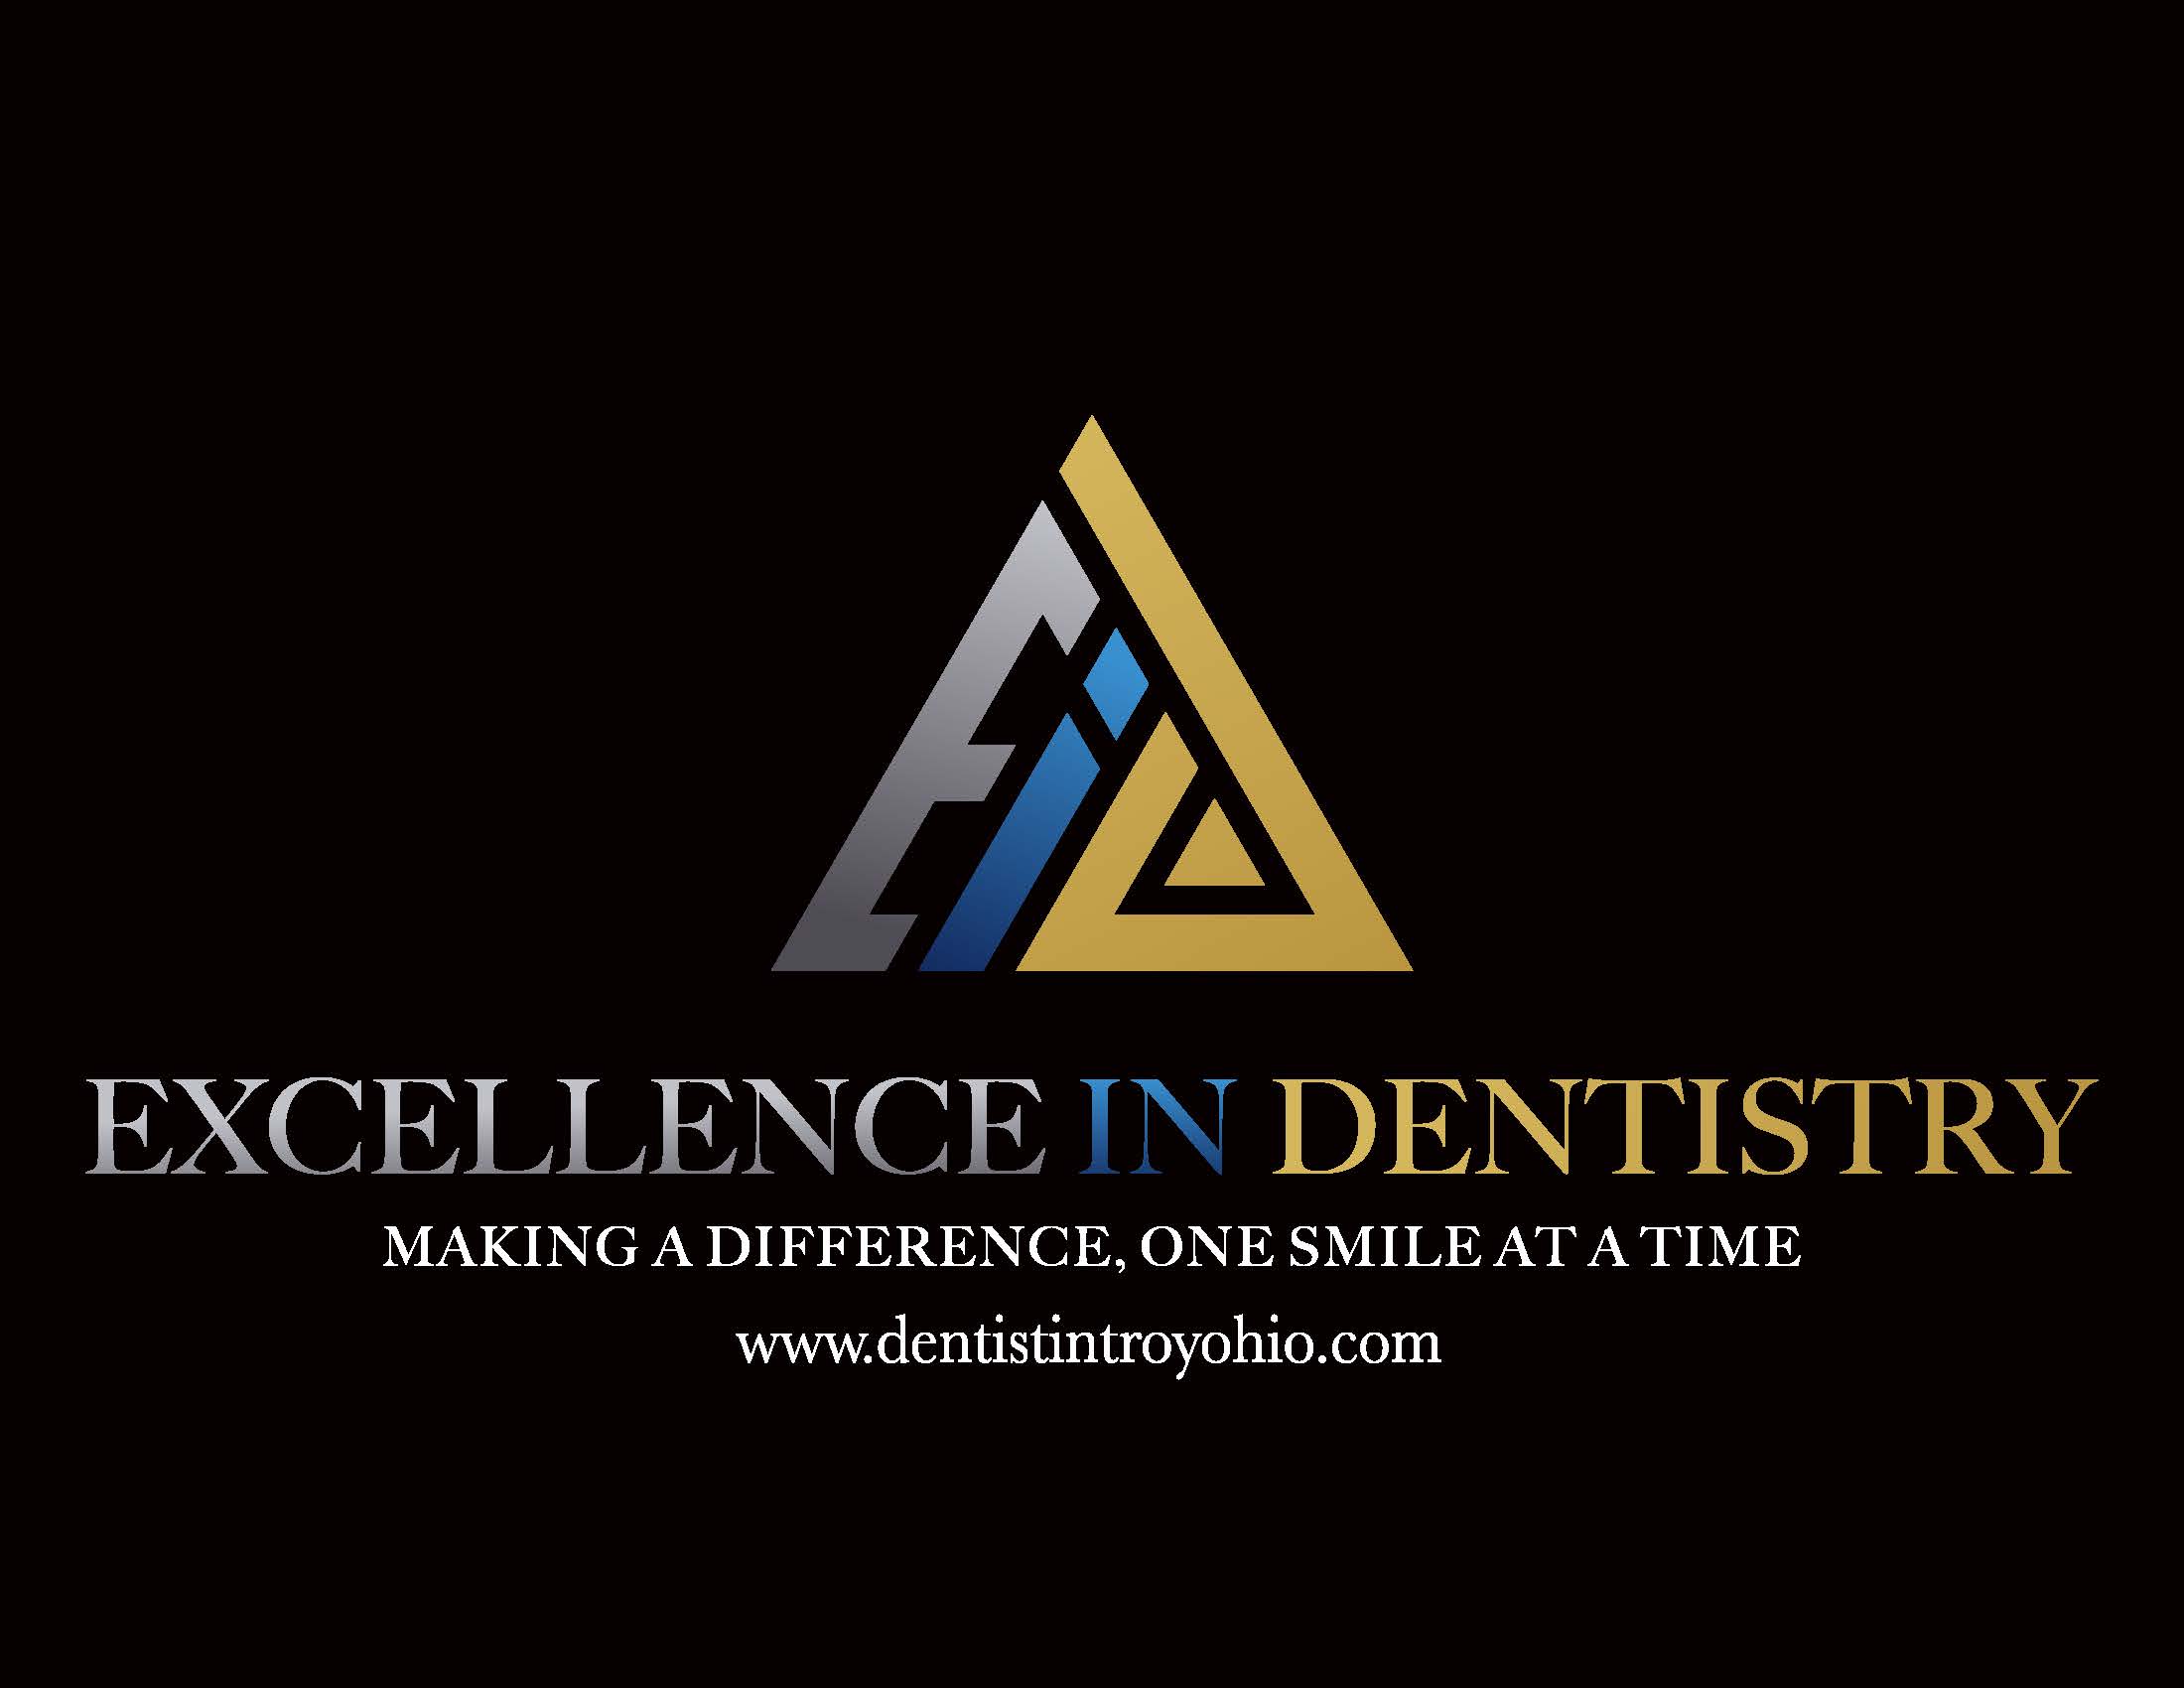 Excellence in Dentistry